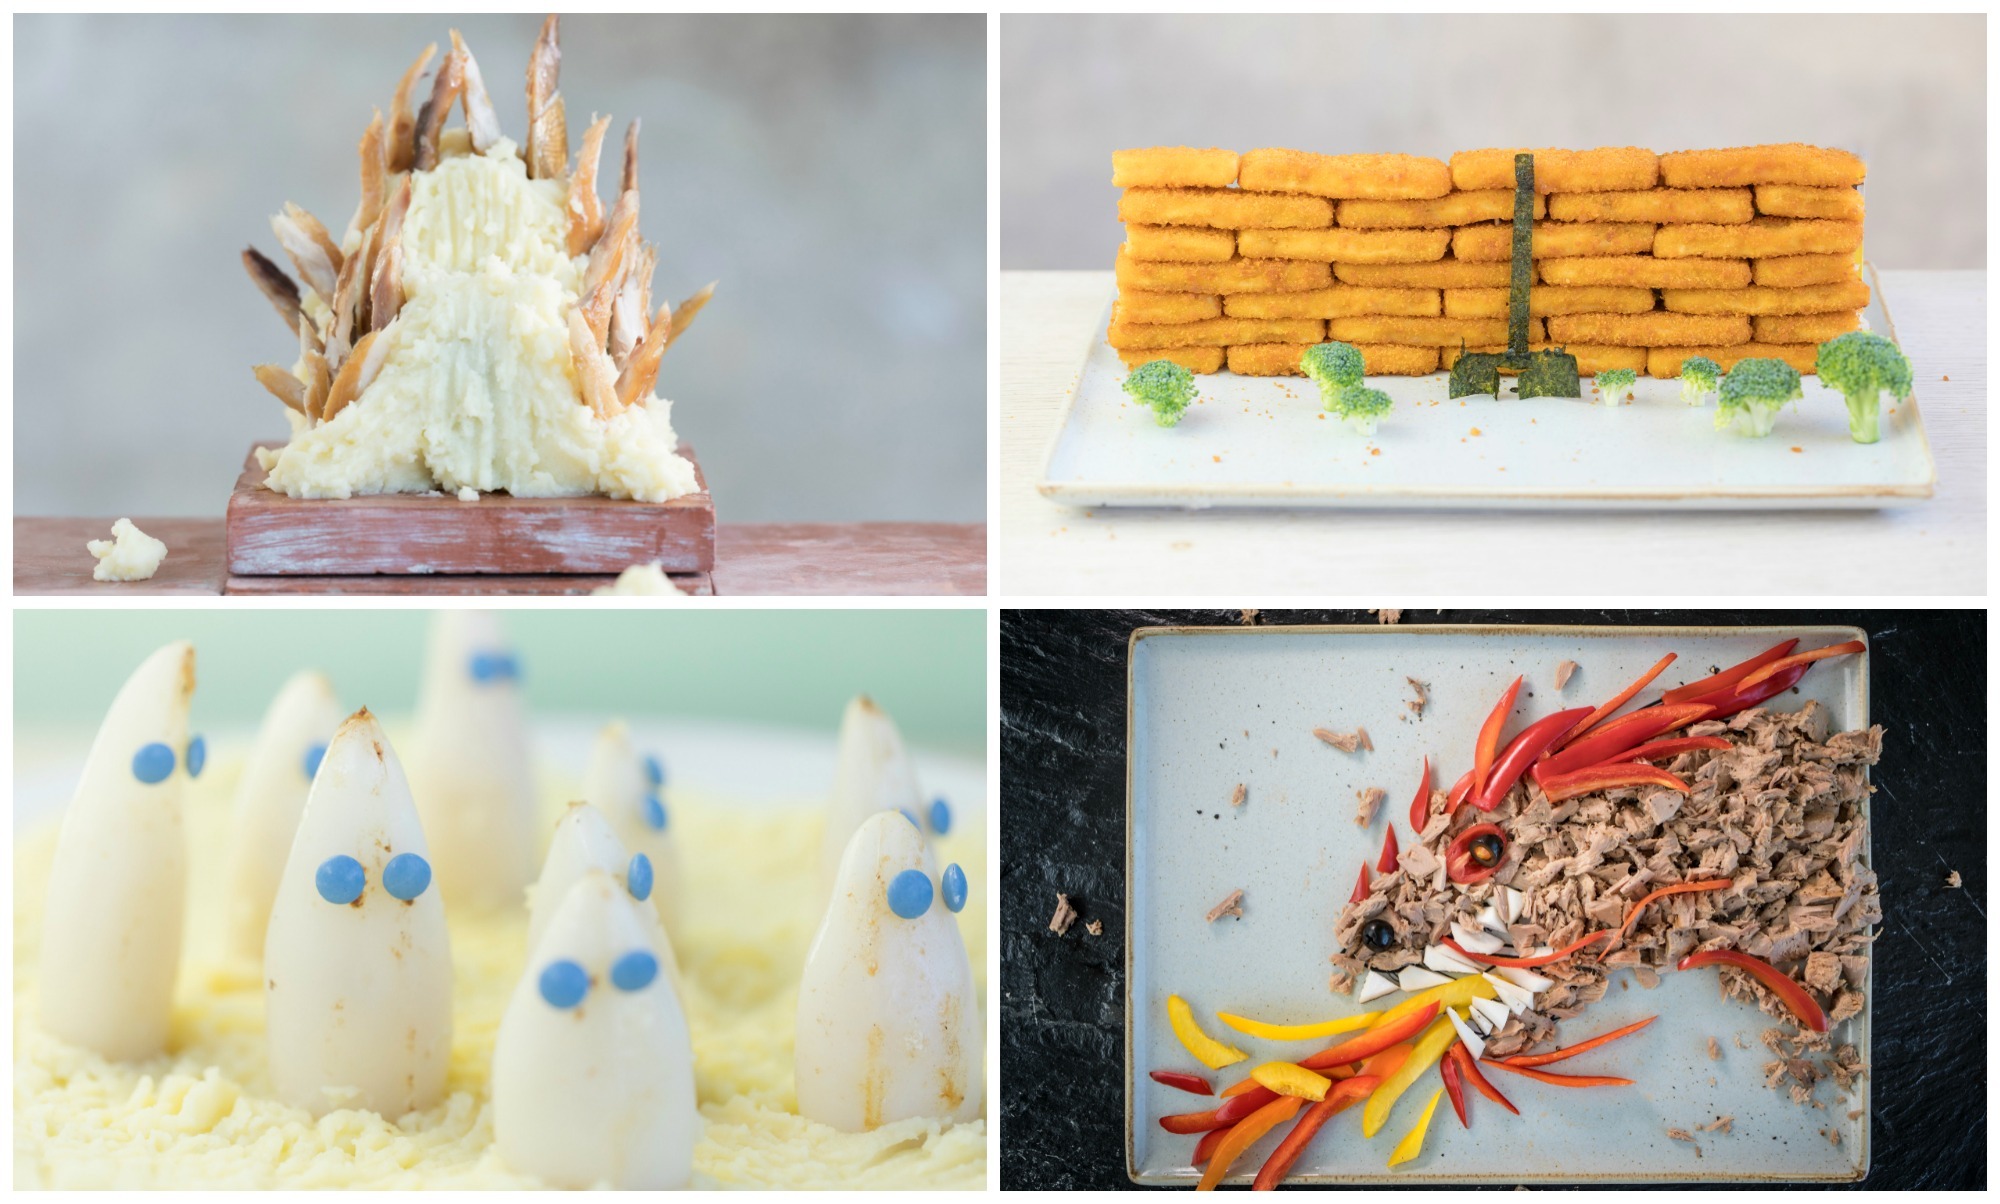 These Game of Thrones inspired fish dishes have been put together by SeaFish